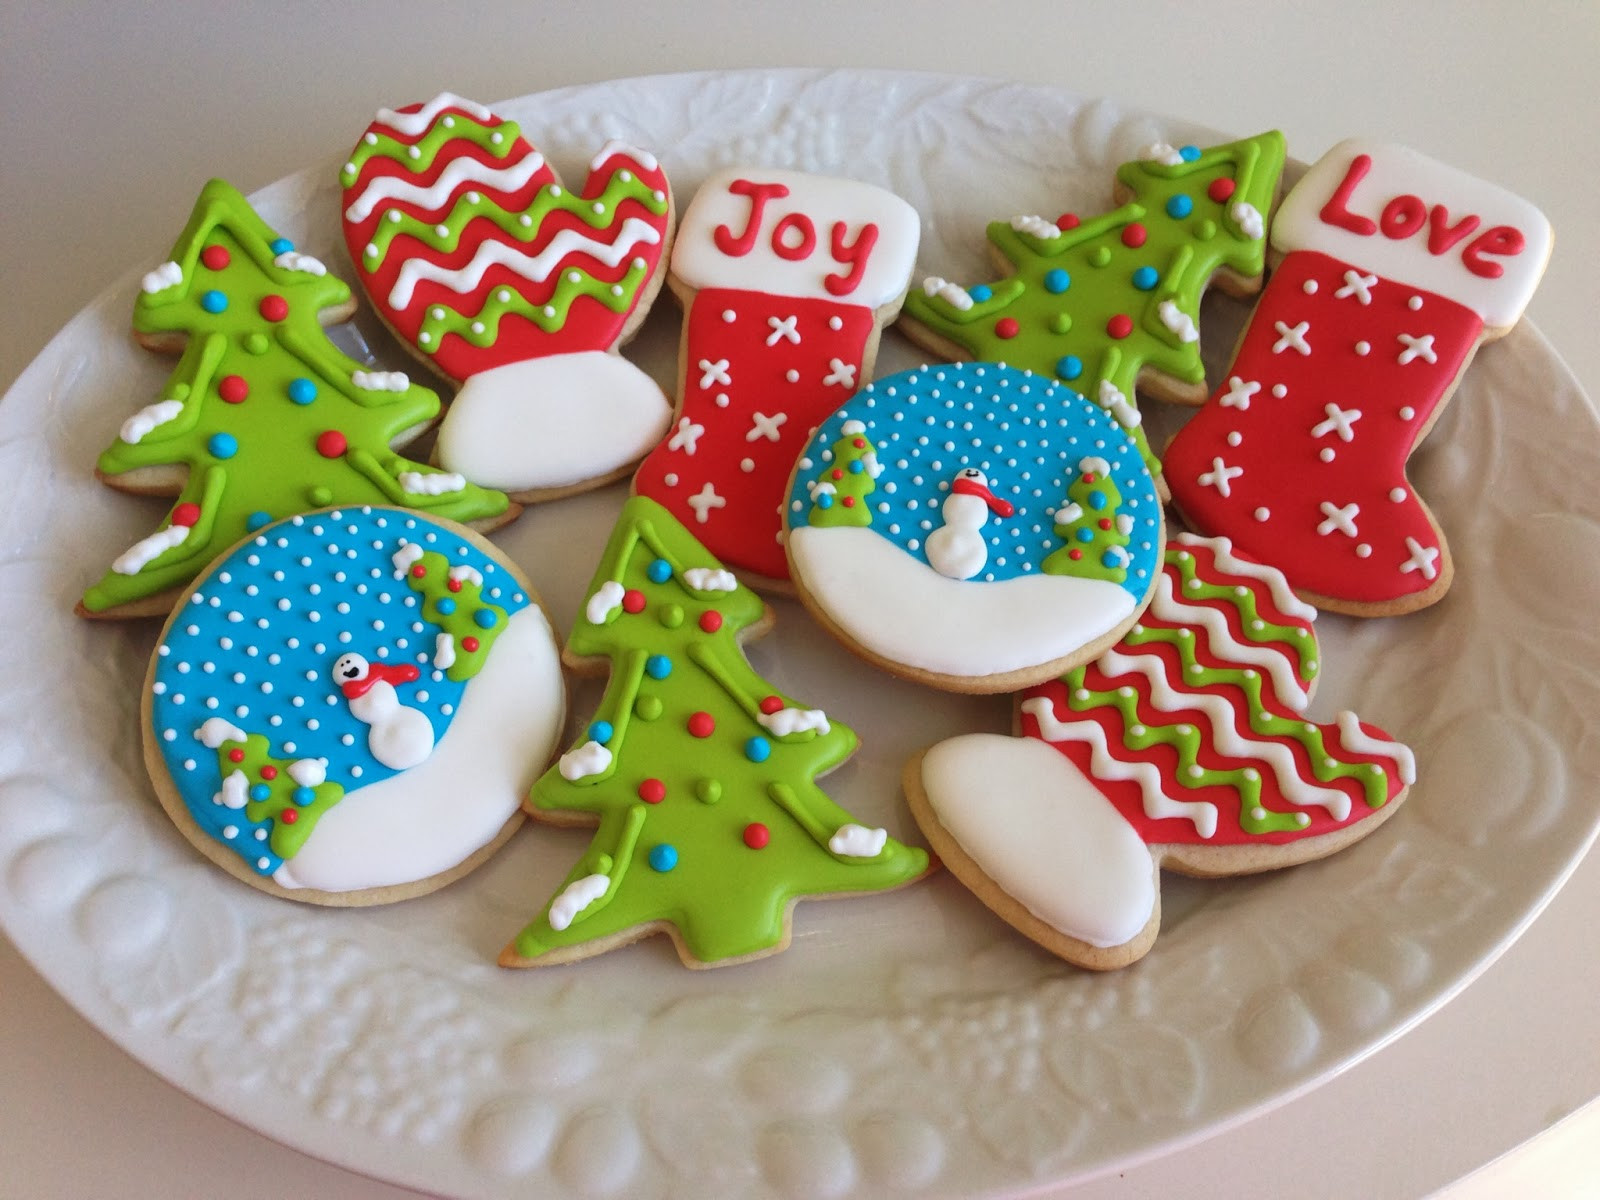 Icing For Christmas Cookies
 monograms & cake Christmas Cut Out Sugar Cookies with